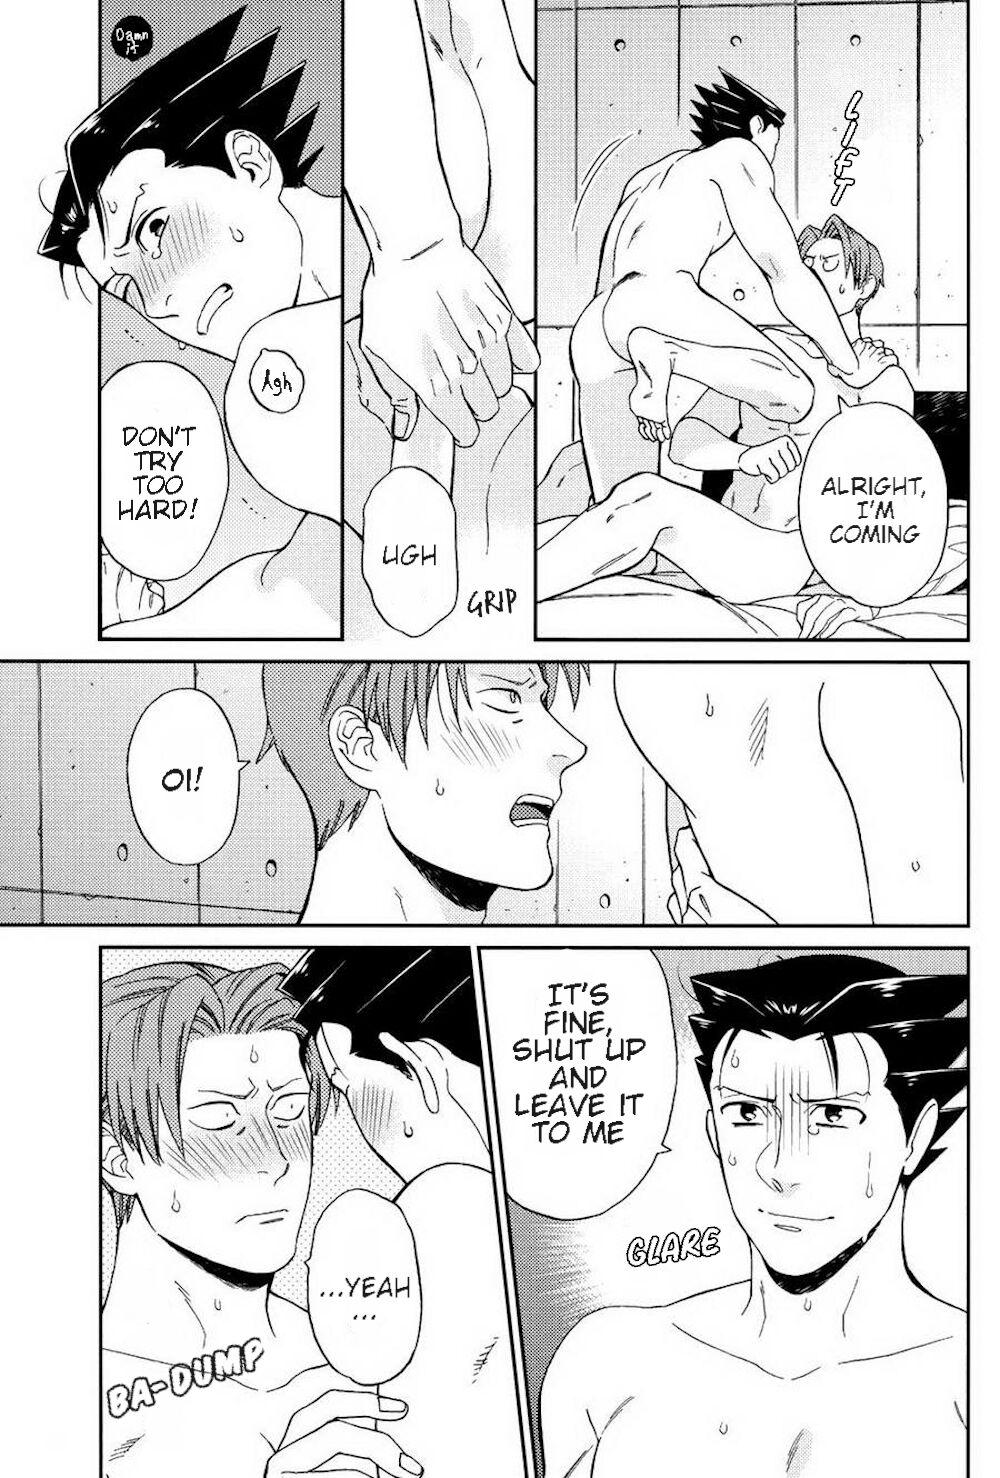 Pack Kid who can do it if he tries, kid who can't - Ace attorney | gyakuten saiban Solo Girl - Page 10